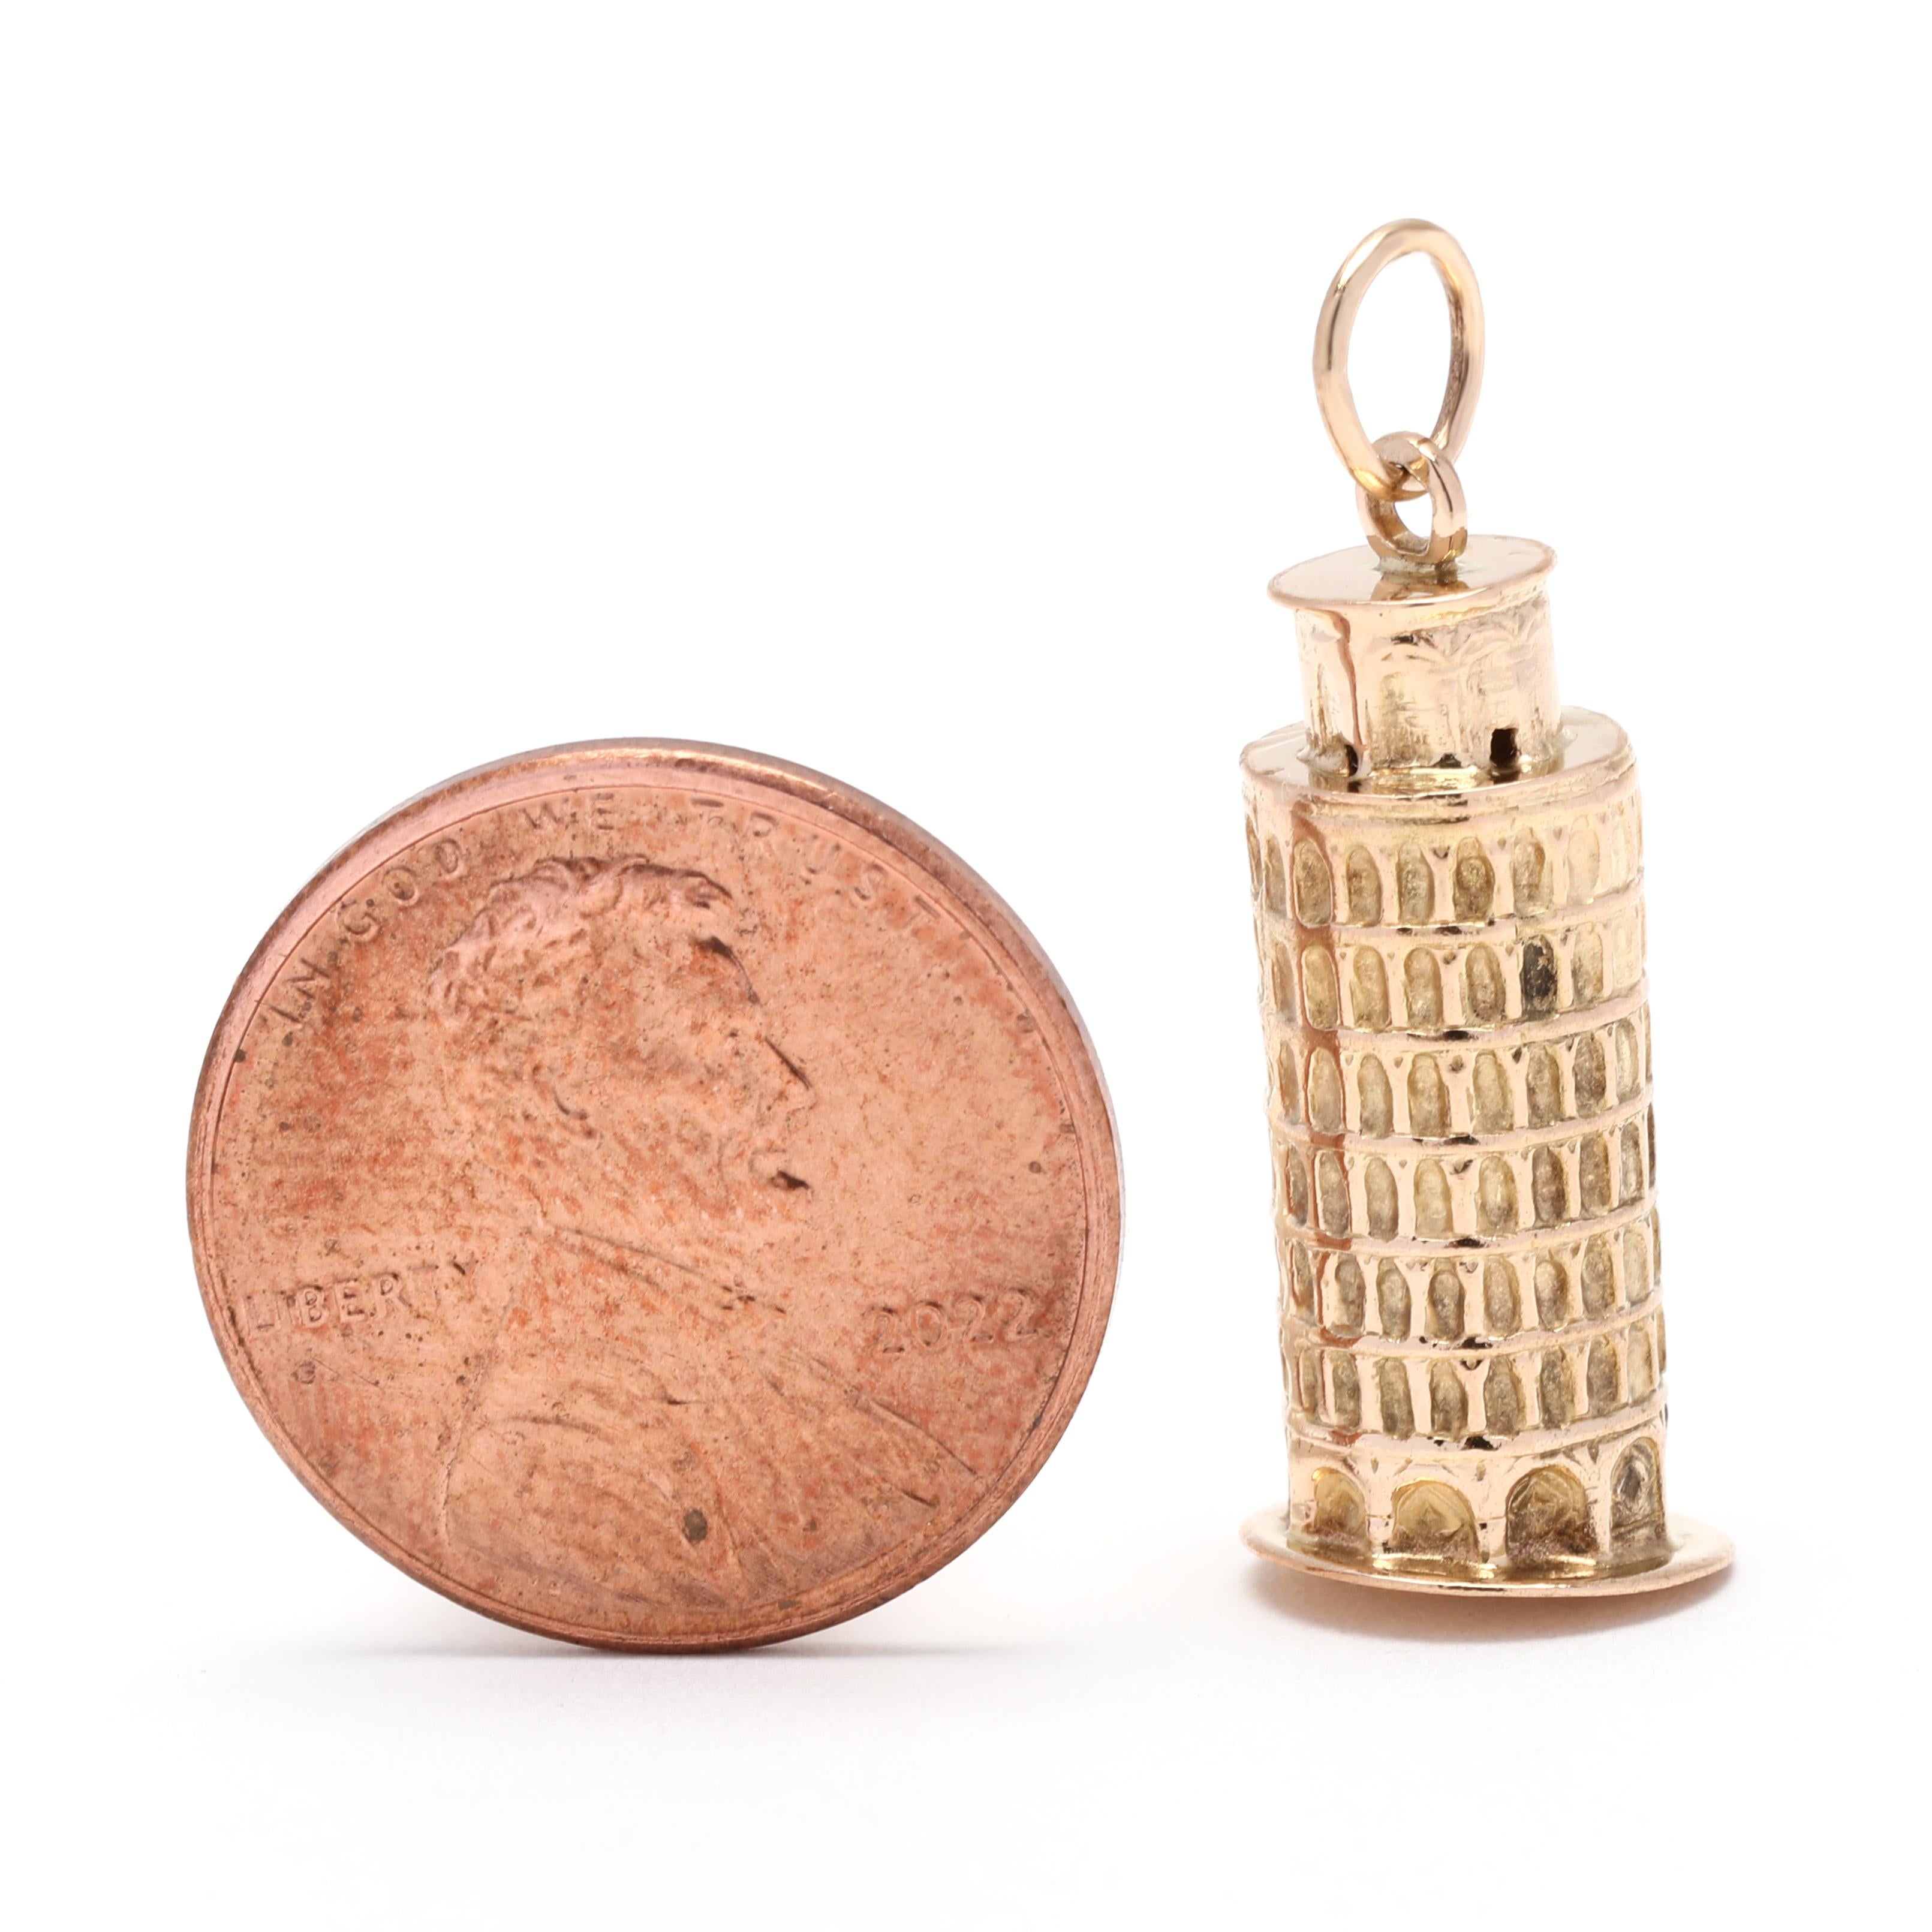 This 18K yellow gold Leaning Tower of Pisa charm is a perfect way to remember the iconic Italian landmark. Its small size (1 inch) allows it to be worn alone or layered with other charms. The classic design and intricate details make it a timeless